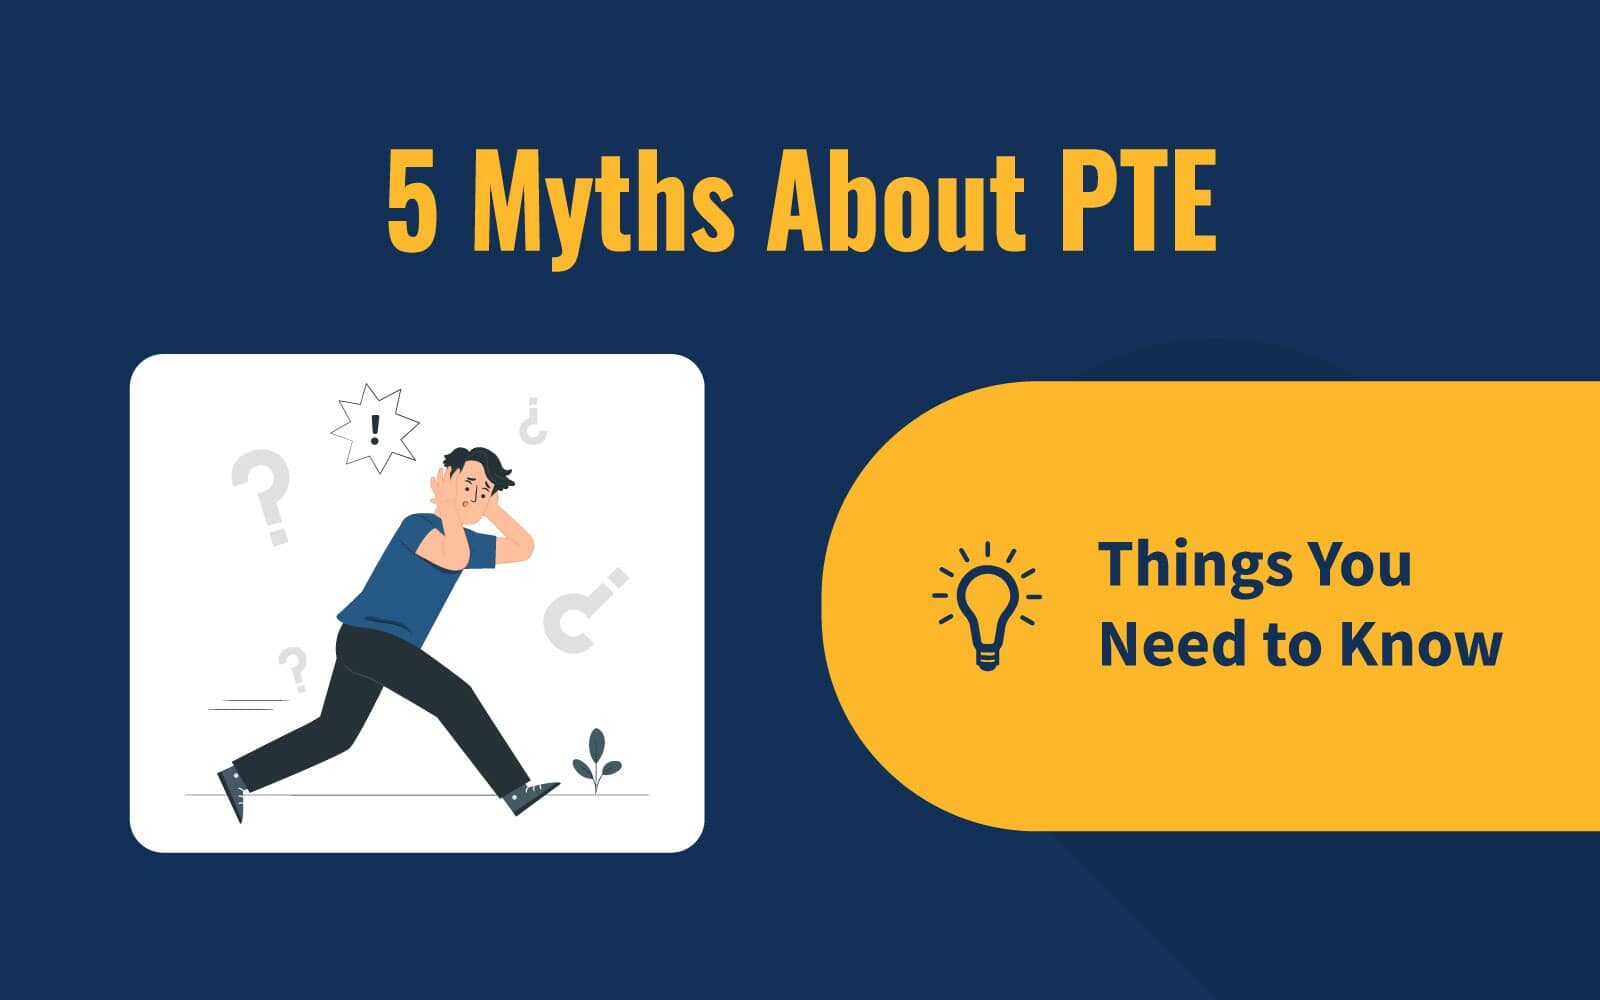 5 Myths About PTE